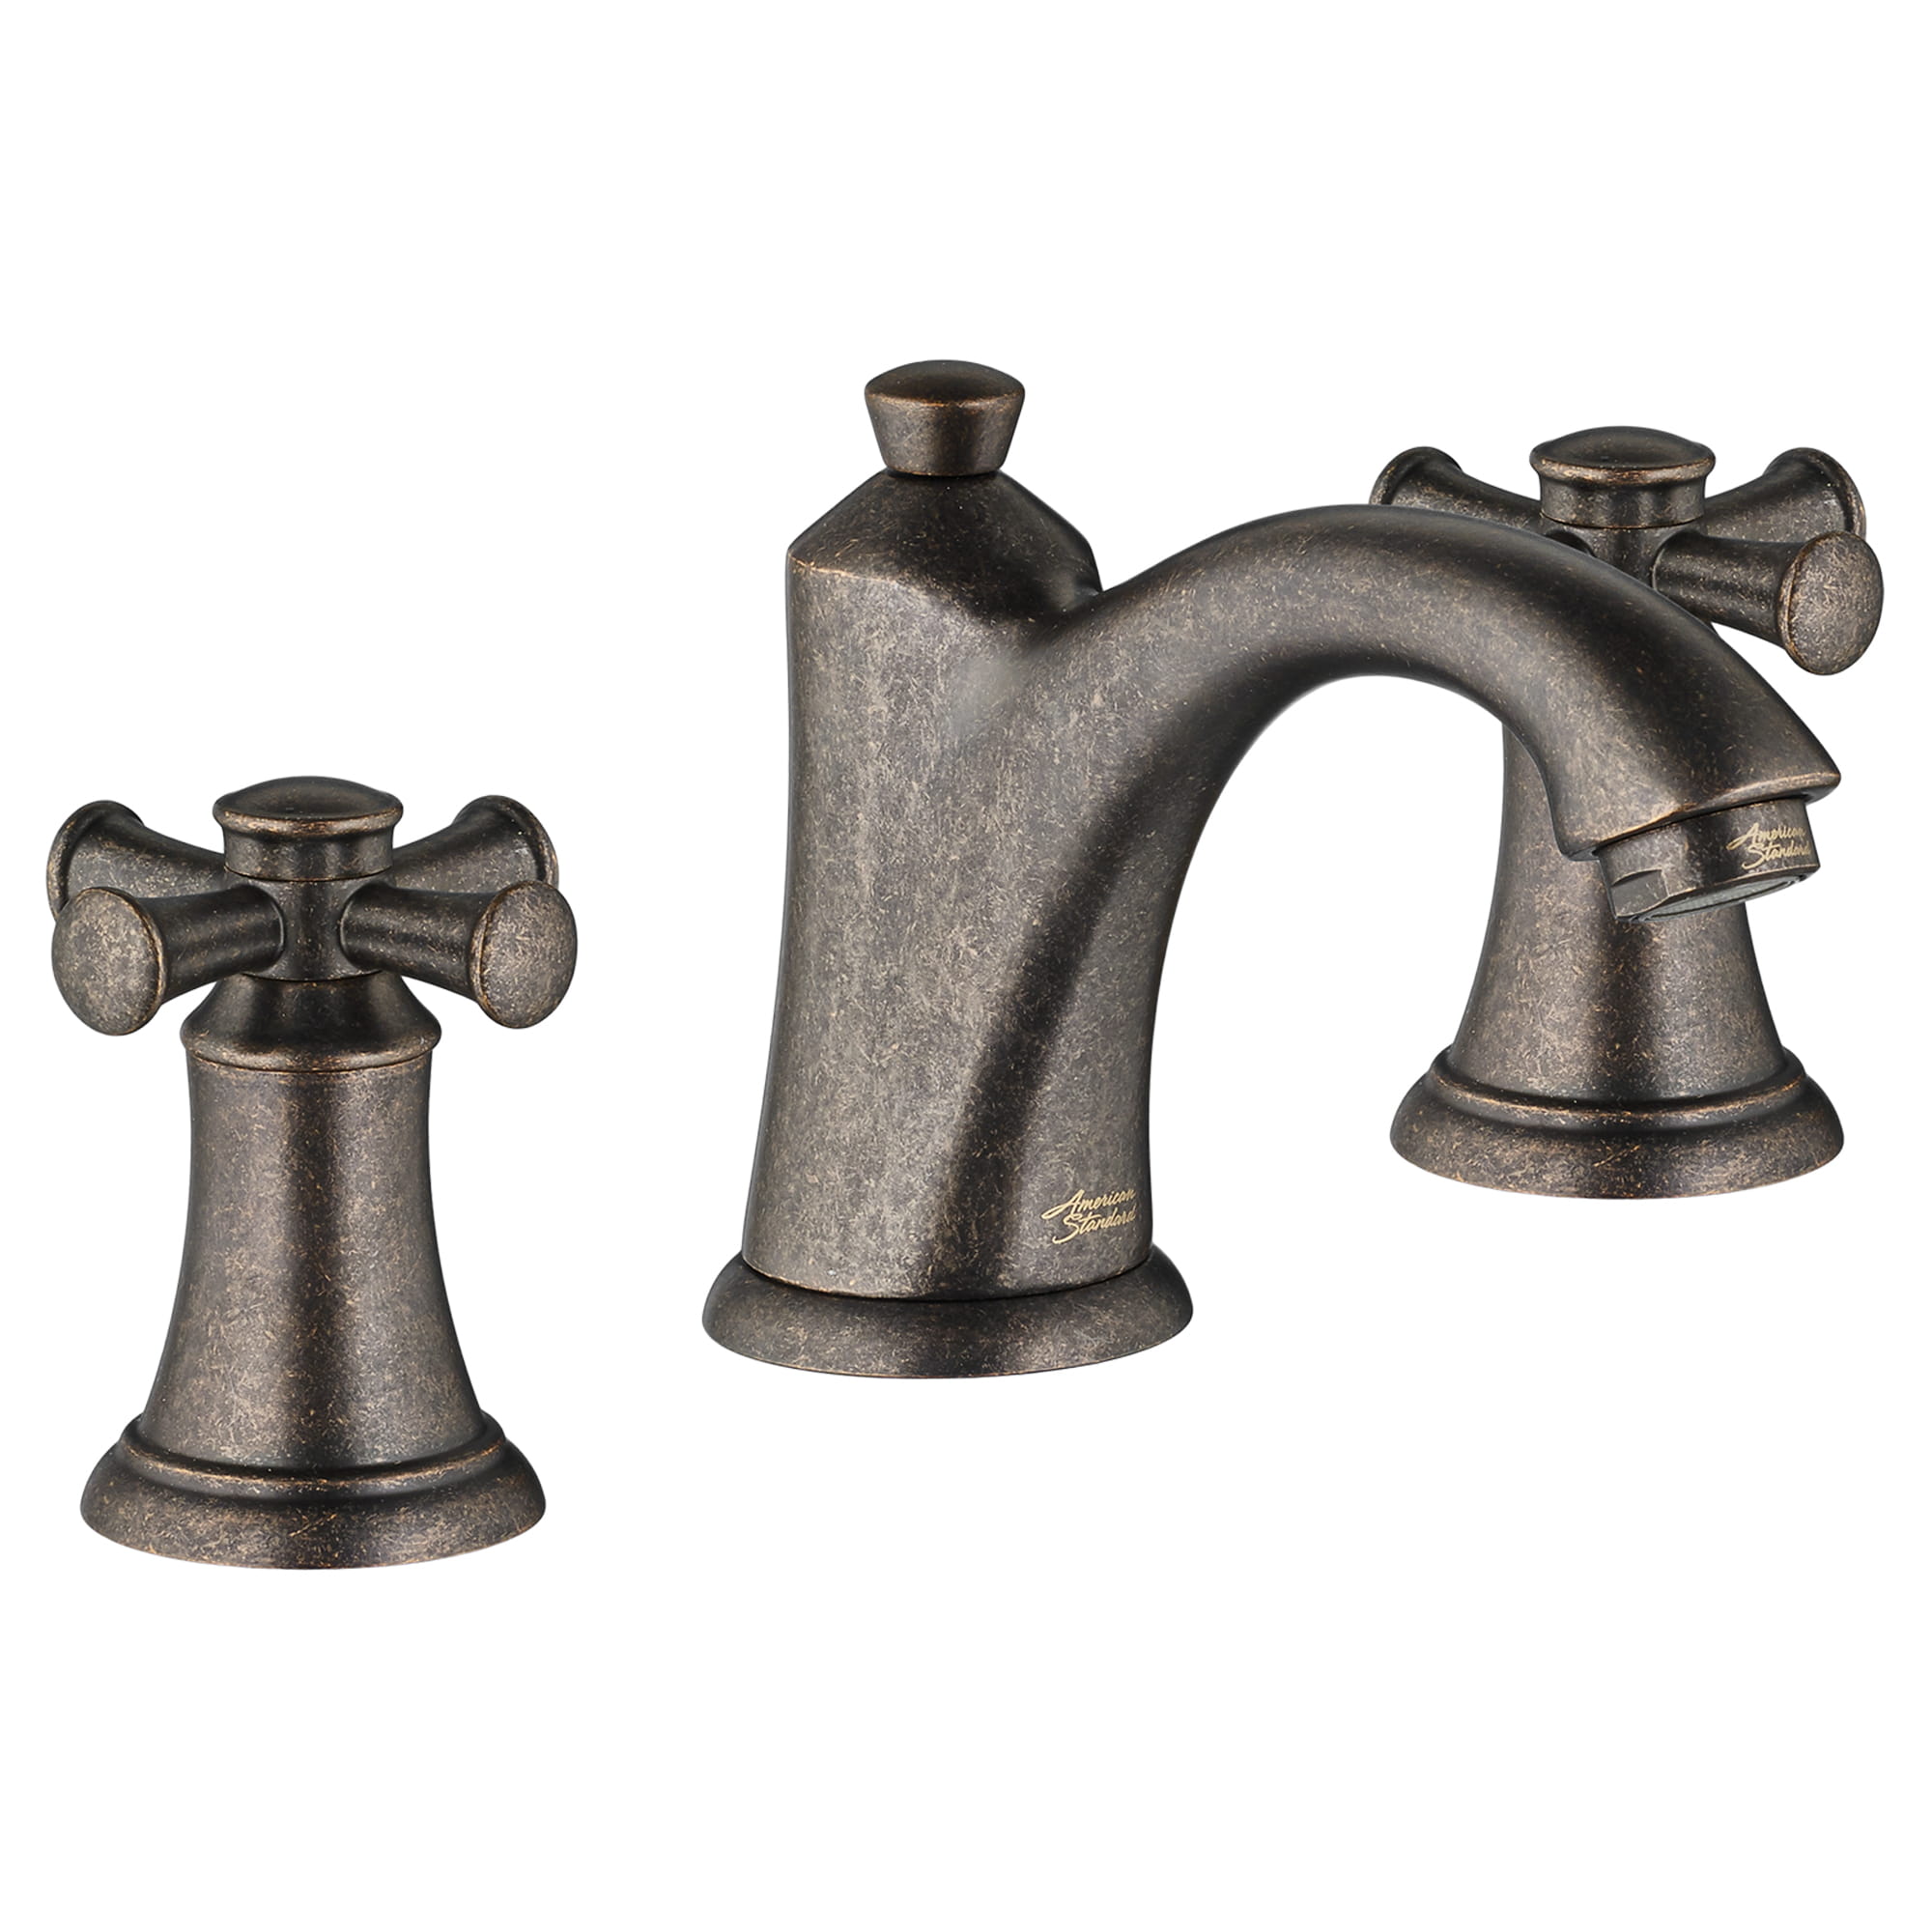 Portsmouth 8 In Widespread 2 Handle Bathroom Faucet 12 GPM with Cross Handles OIL RUBBED BRONZE